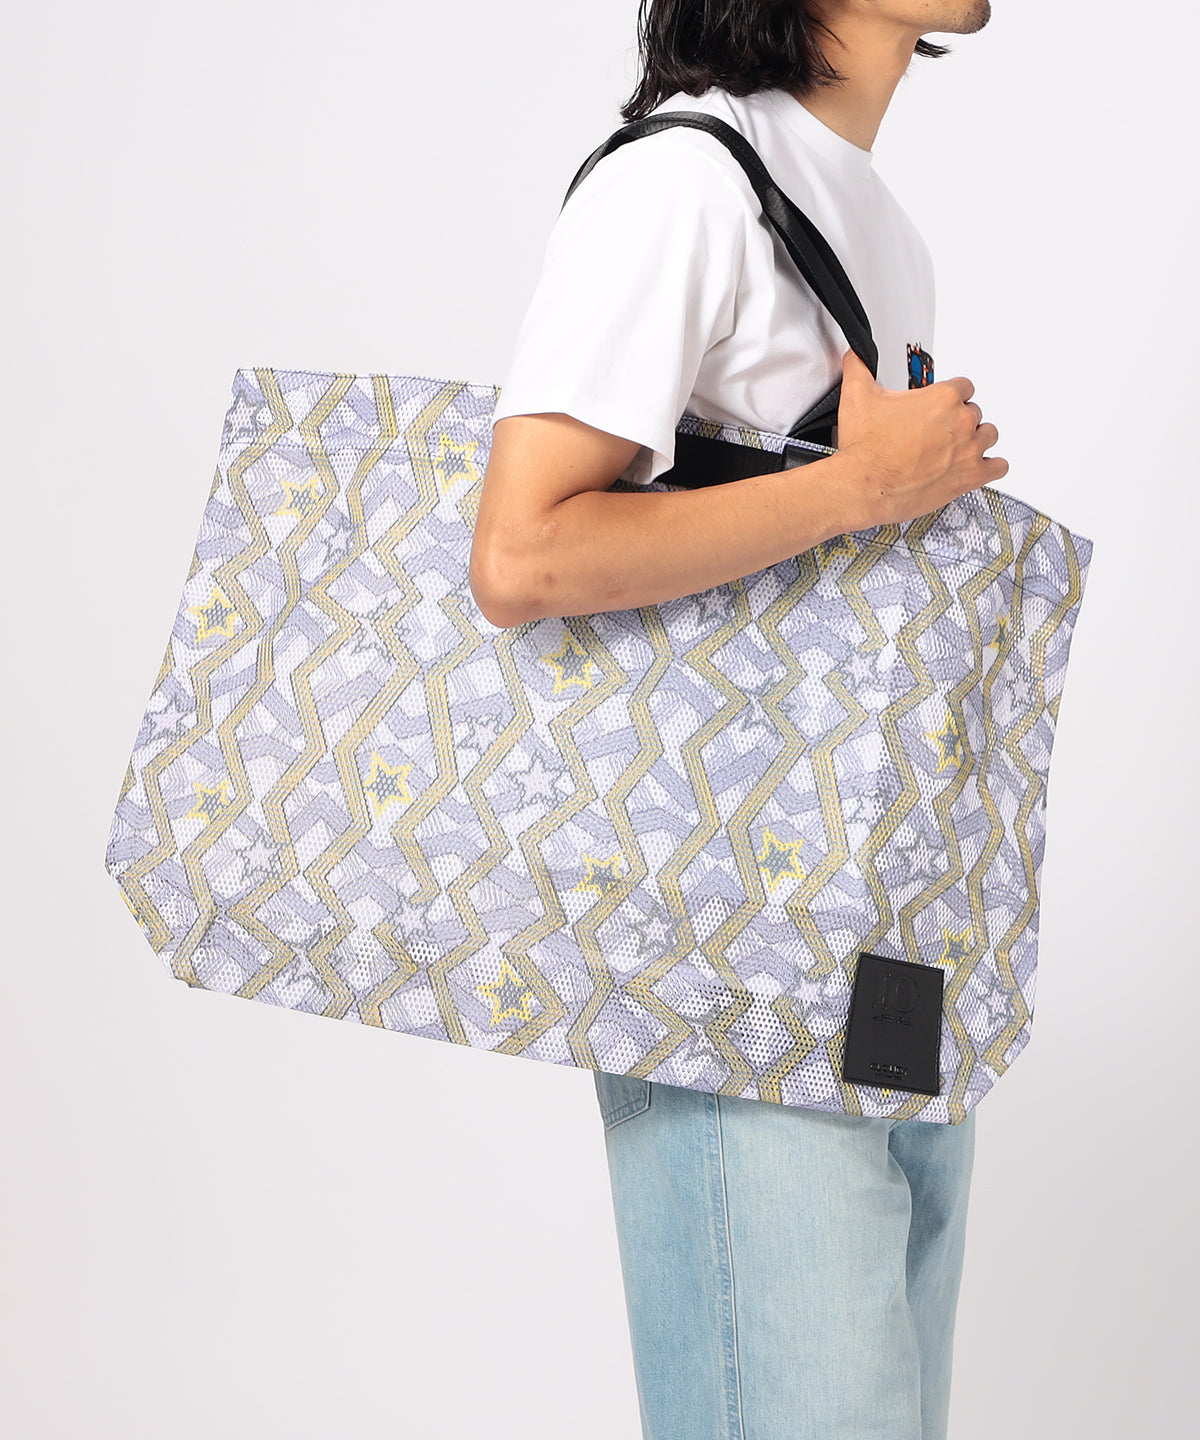 African Textile Mesh Tote Bag (Large) BEIGE | バッグ | CLOUDY公式 ...